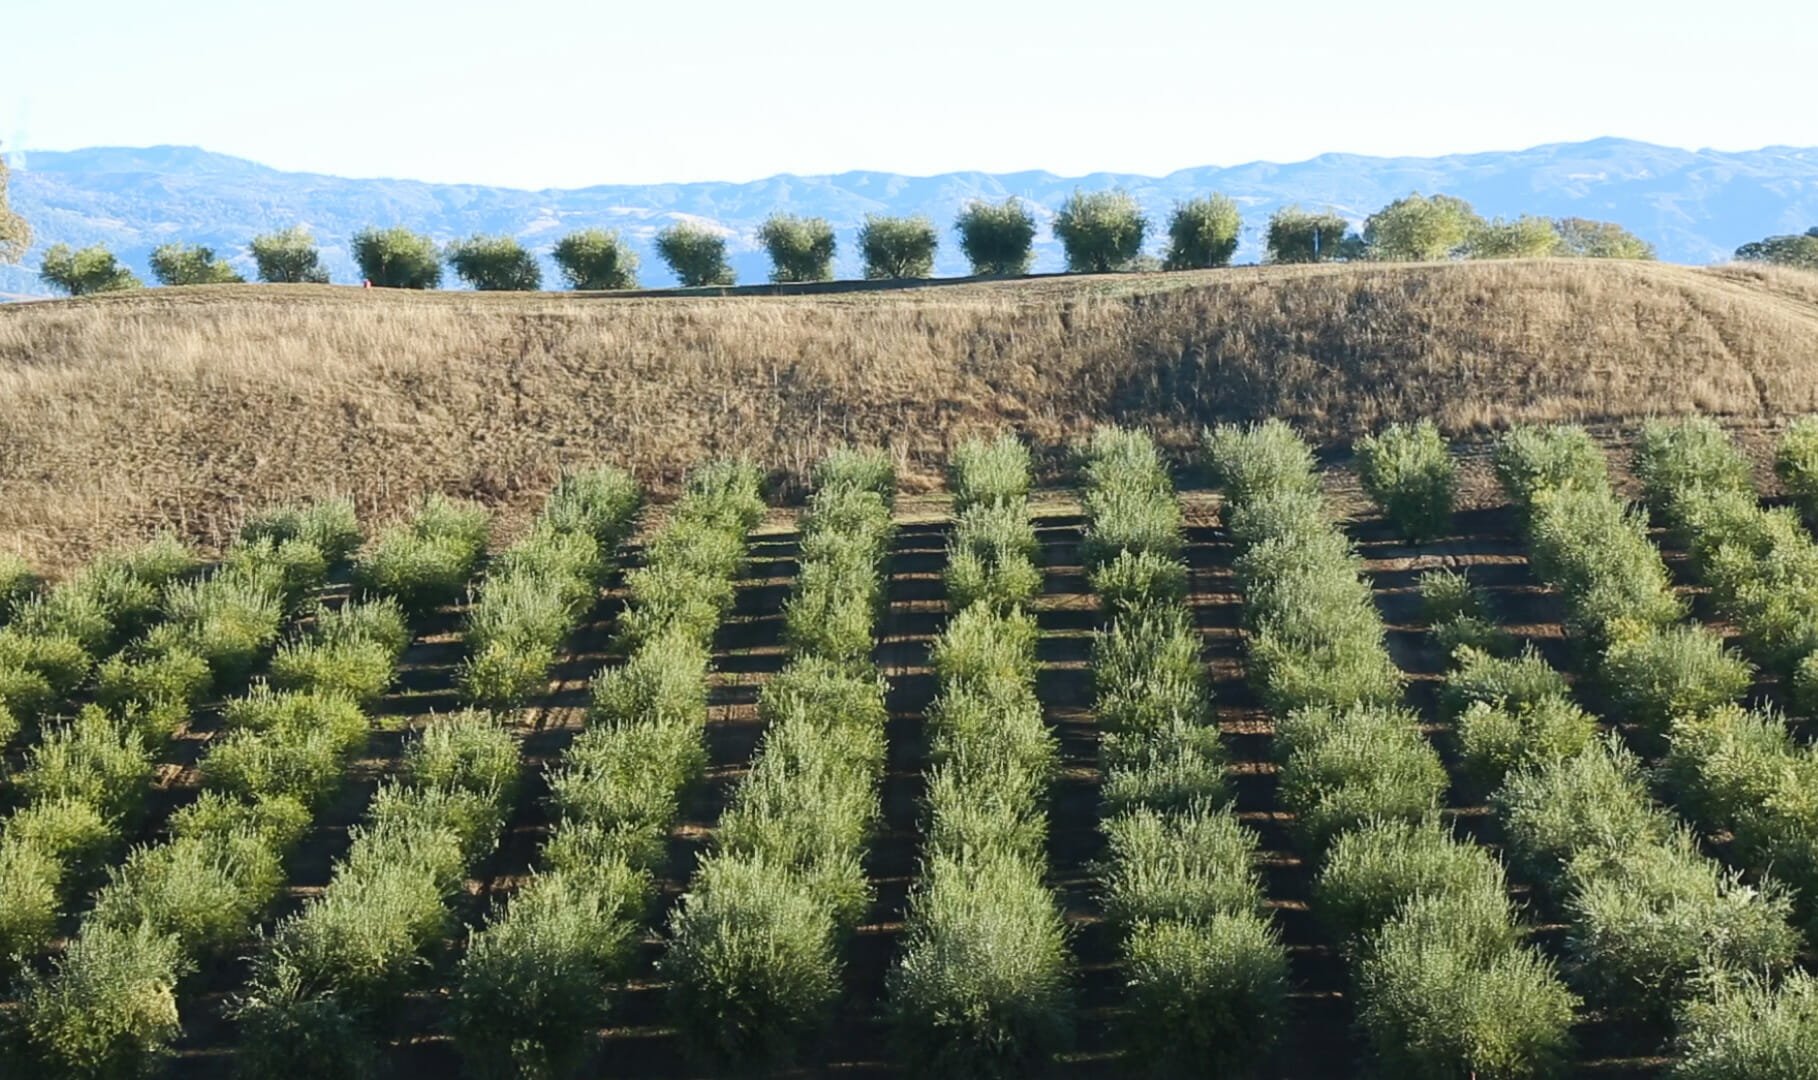 Rows of olive trees planted at Jordan Winery in 1996